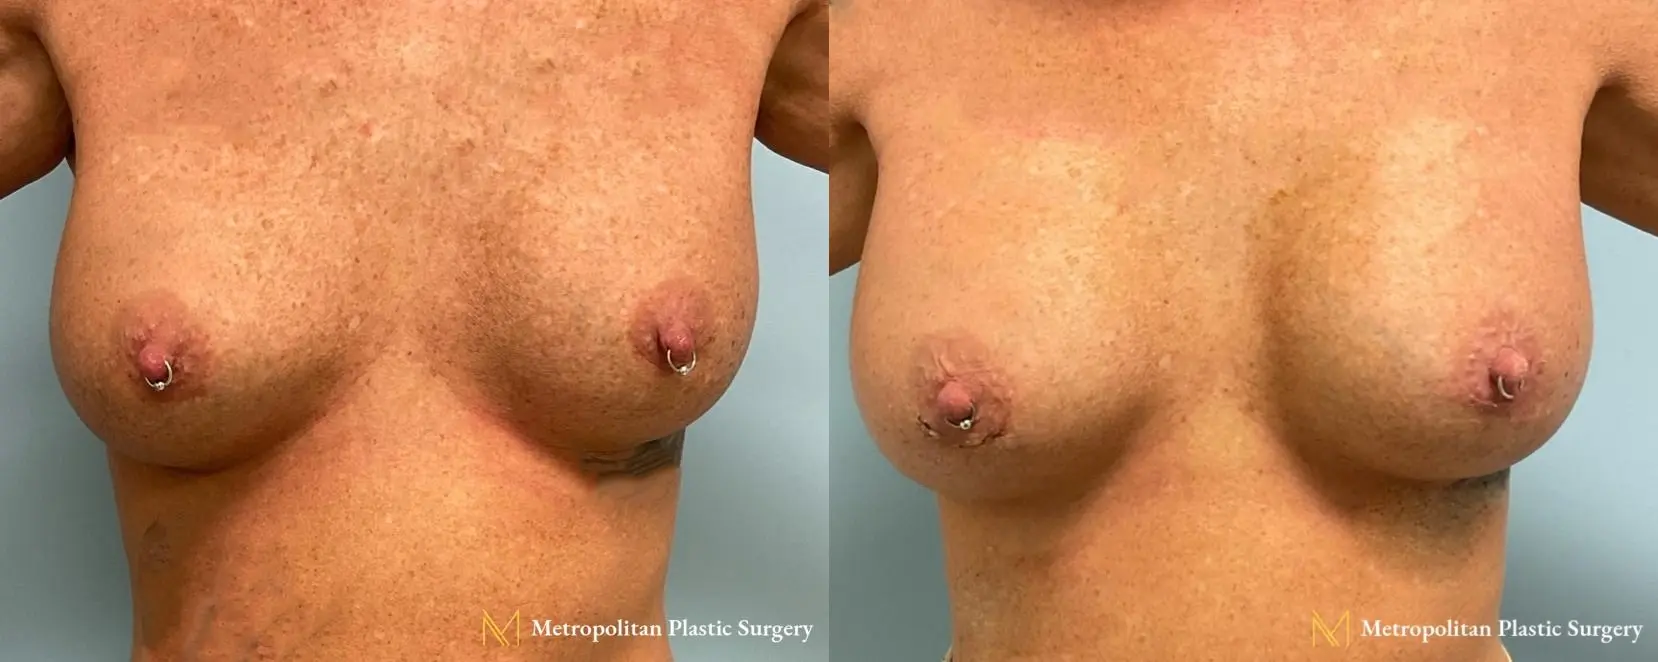 Breast Augmentation (Mammoplasty) by Julia Spears MD Before and After - Before and After